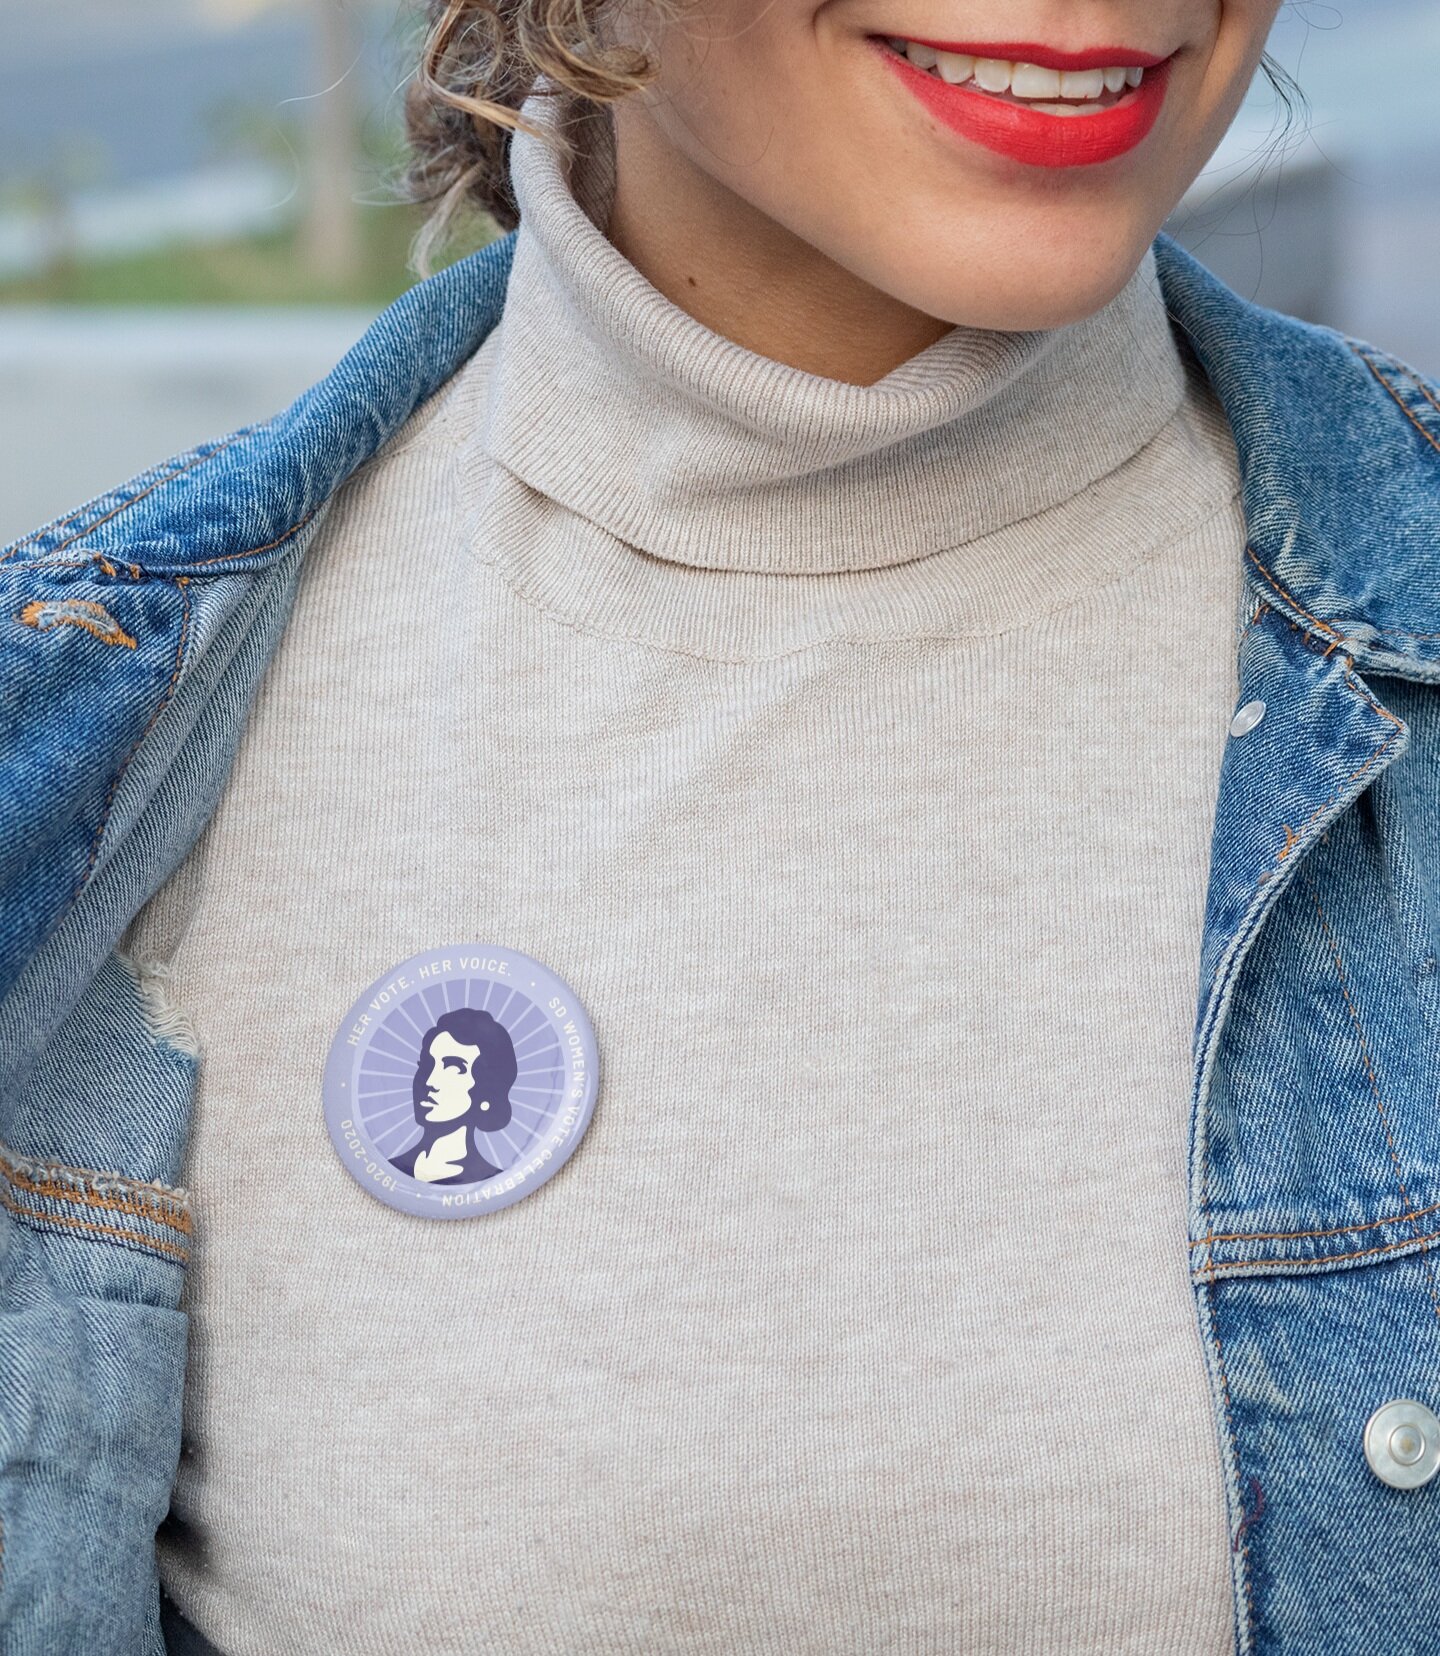 pin-mockup-featuring-a-smiling-woman-with-round-glasses-31898.jpg